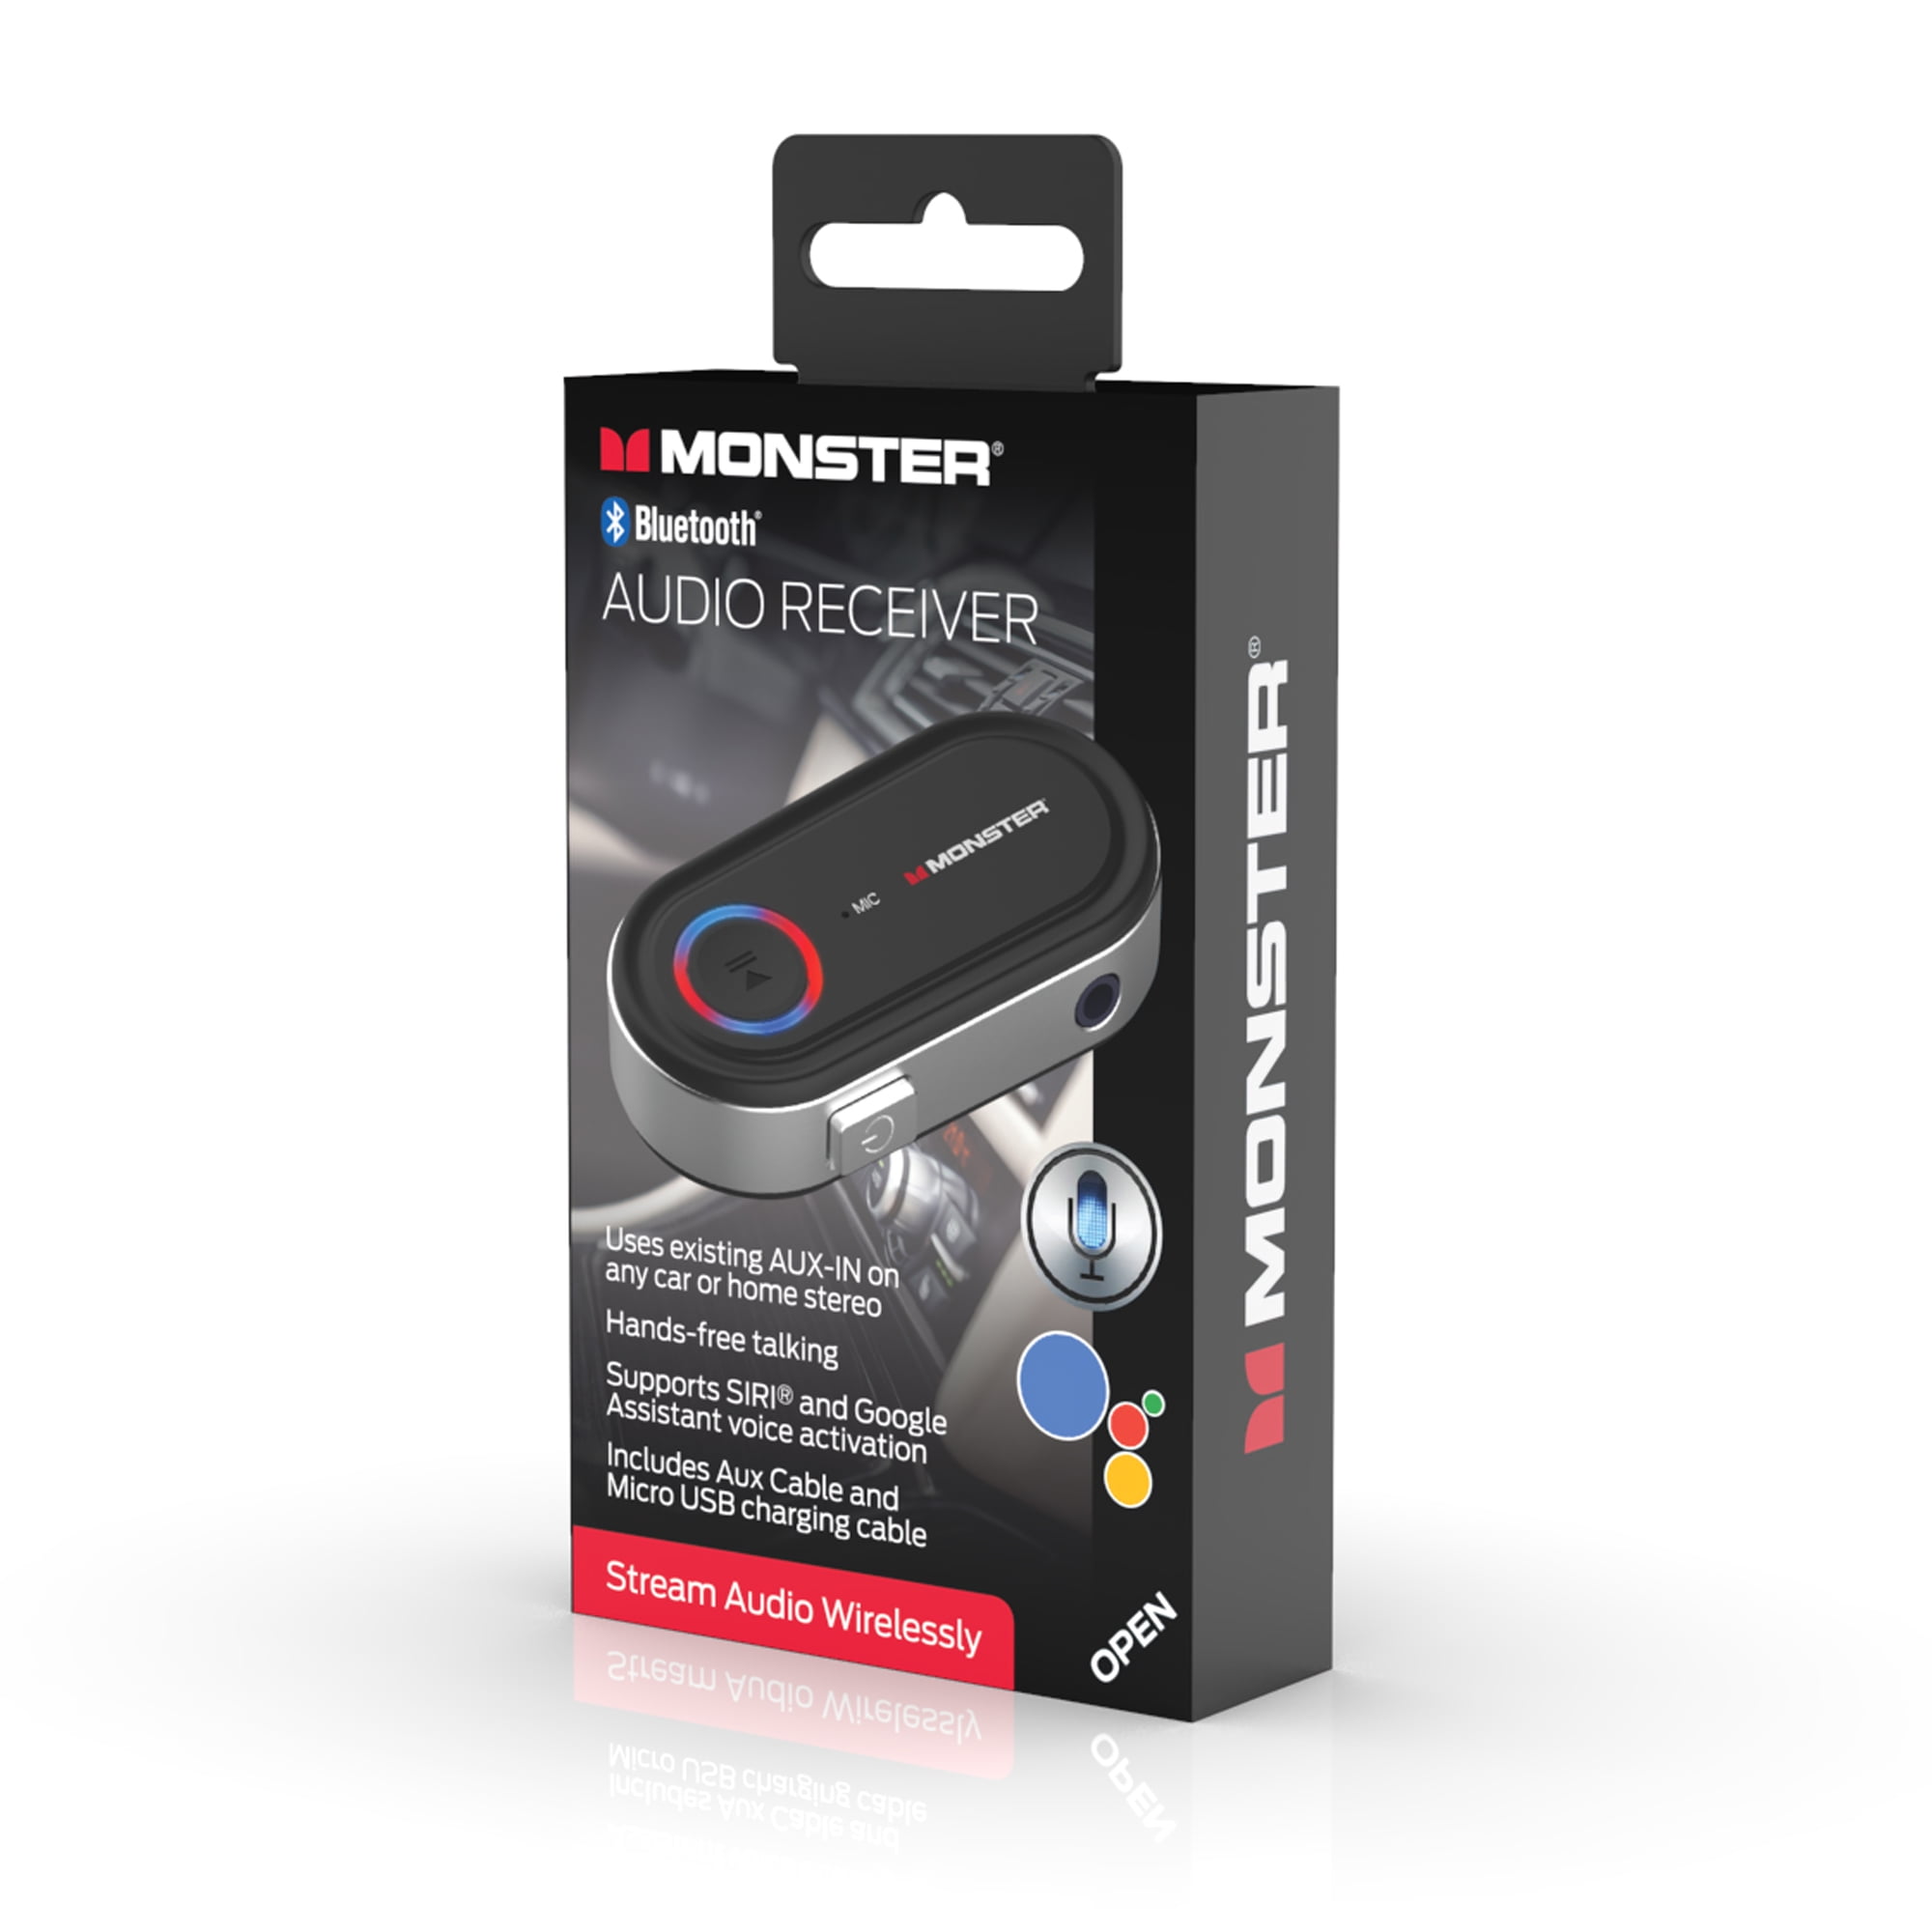 Monster Bluetooth Audio Receiver,  Auxiliary Audio Receiver with Voice Control